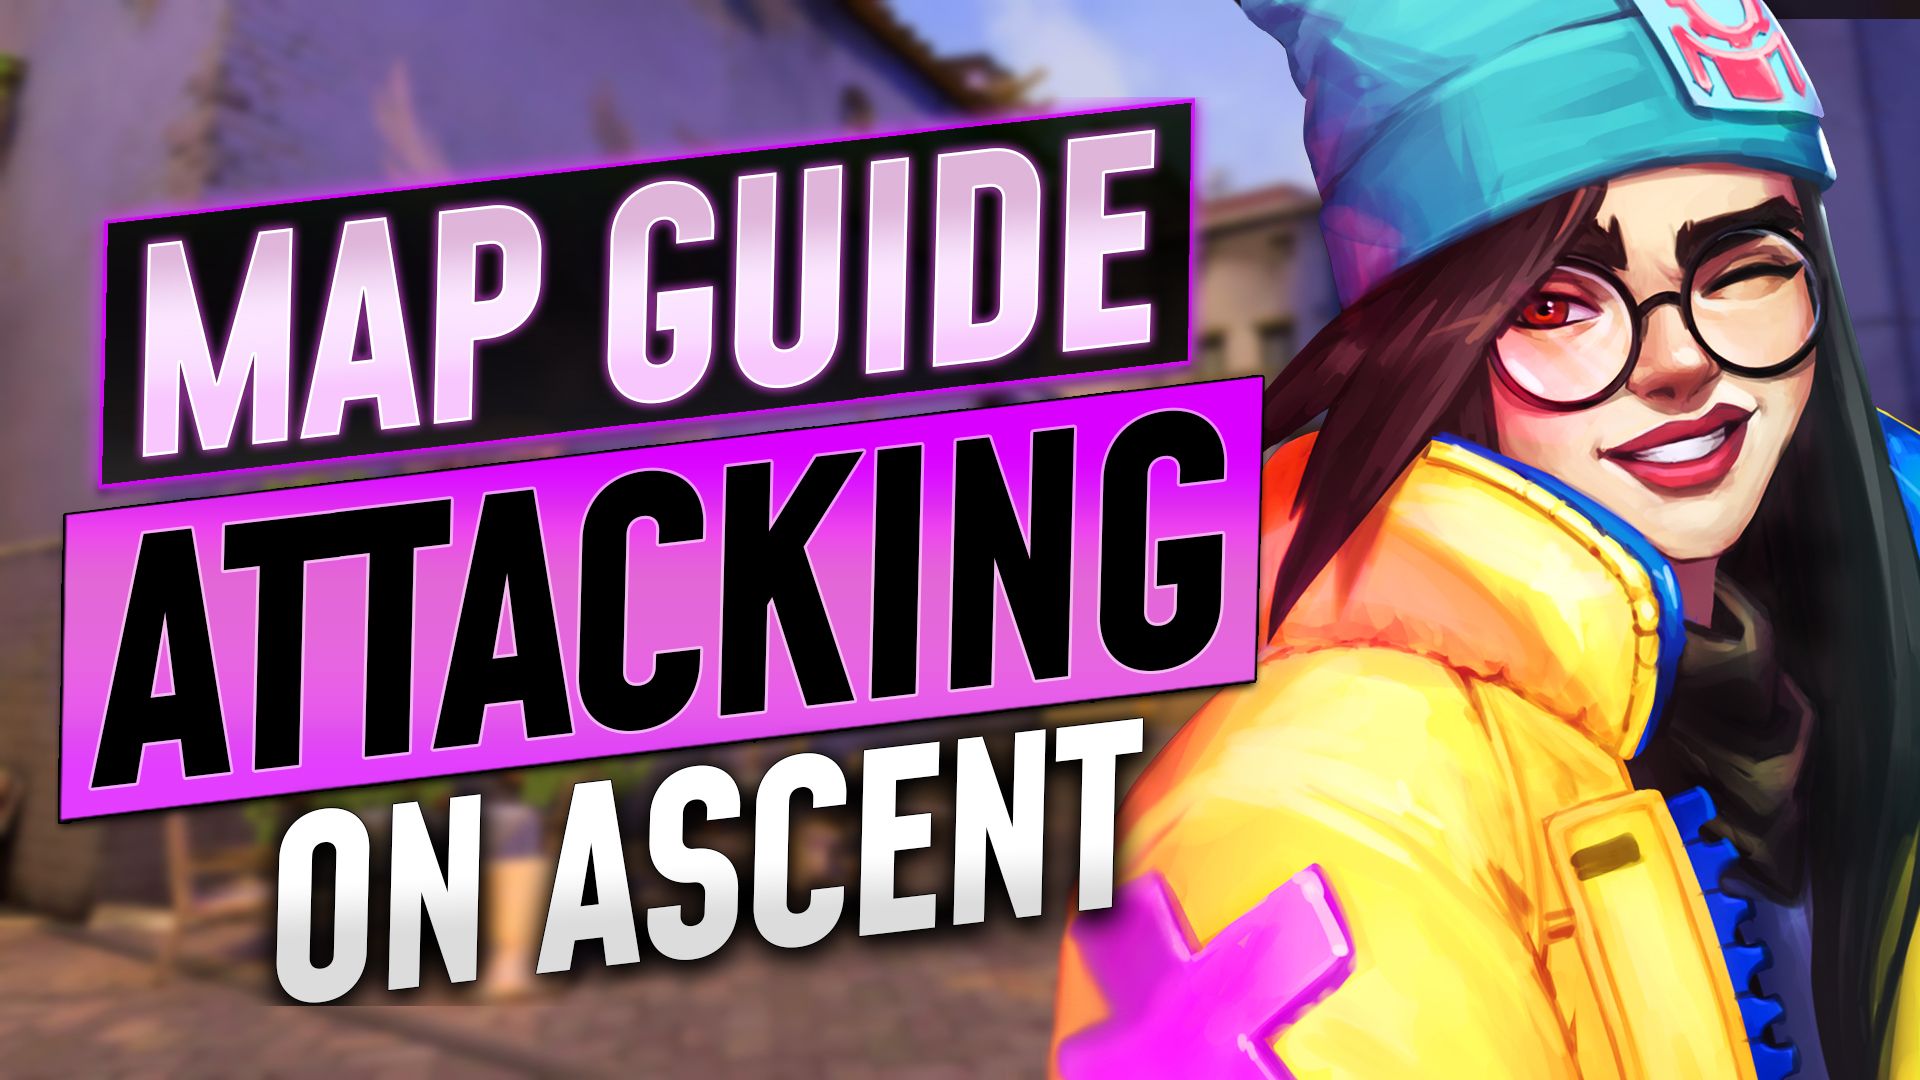 A Detailed Map Guide for Ascent - Attacking